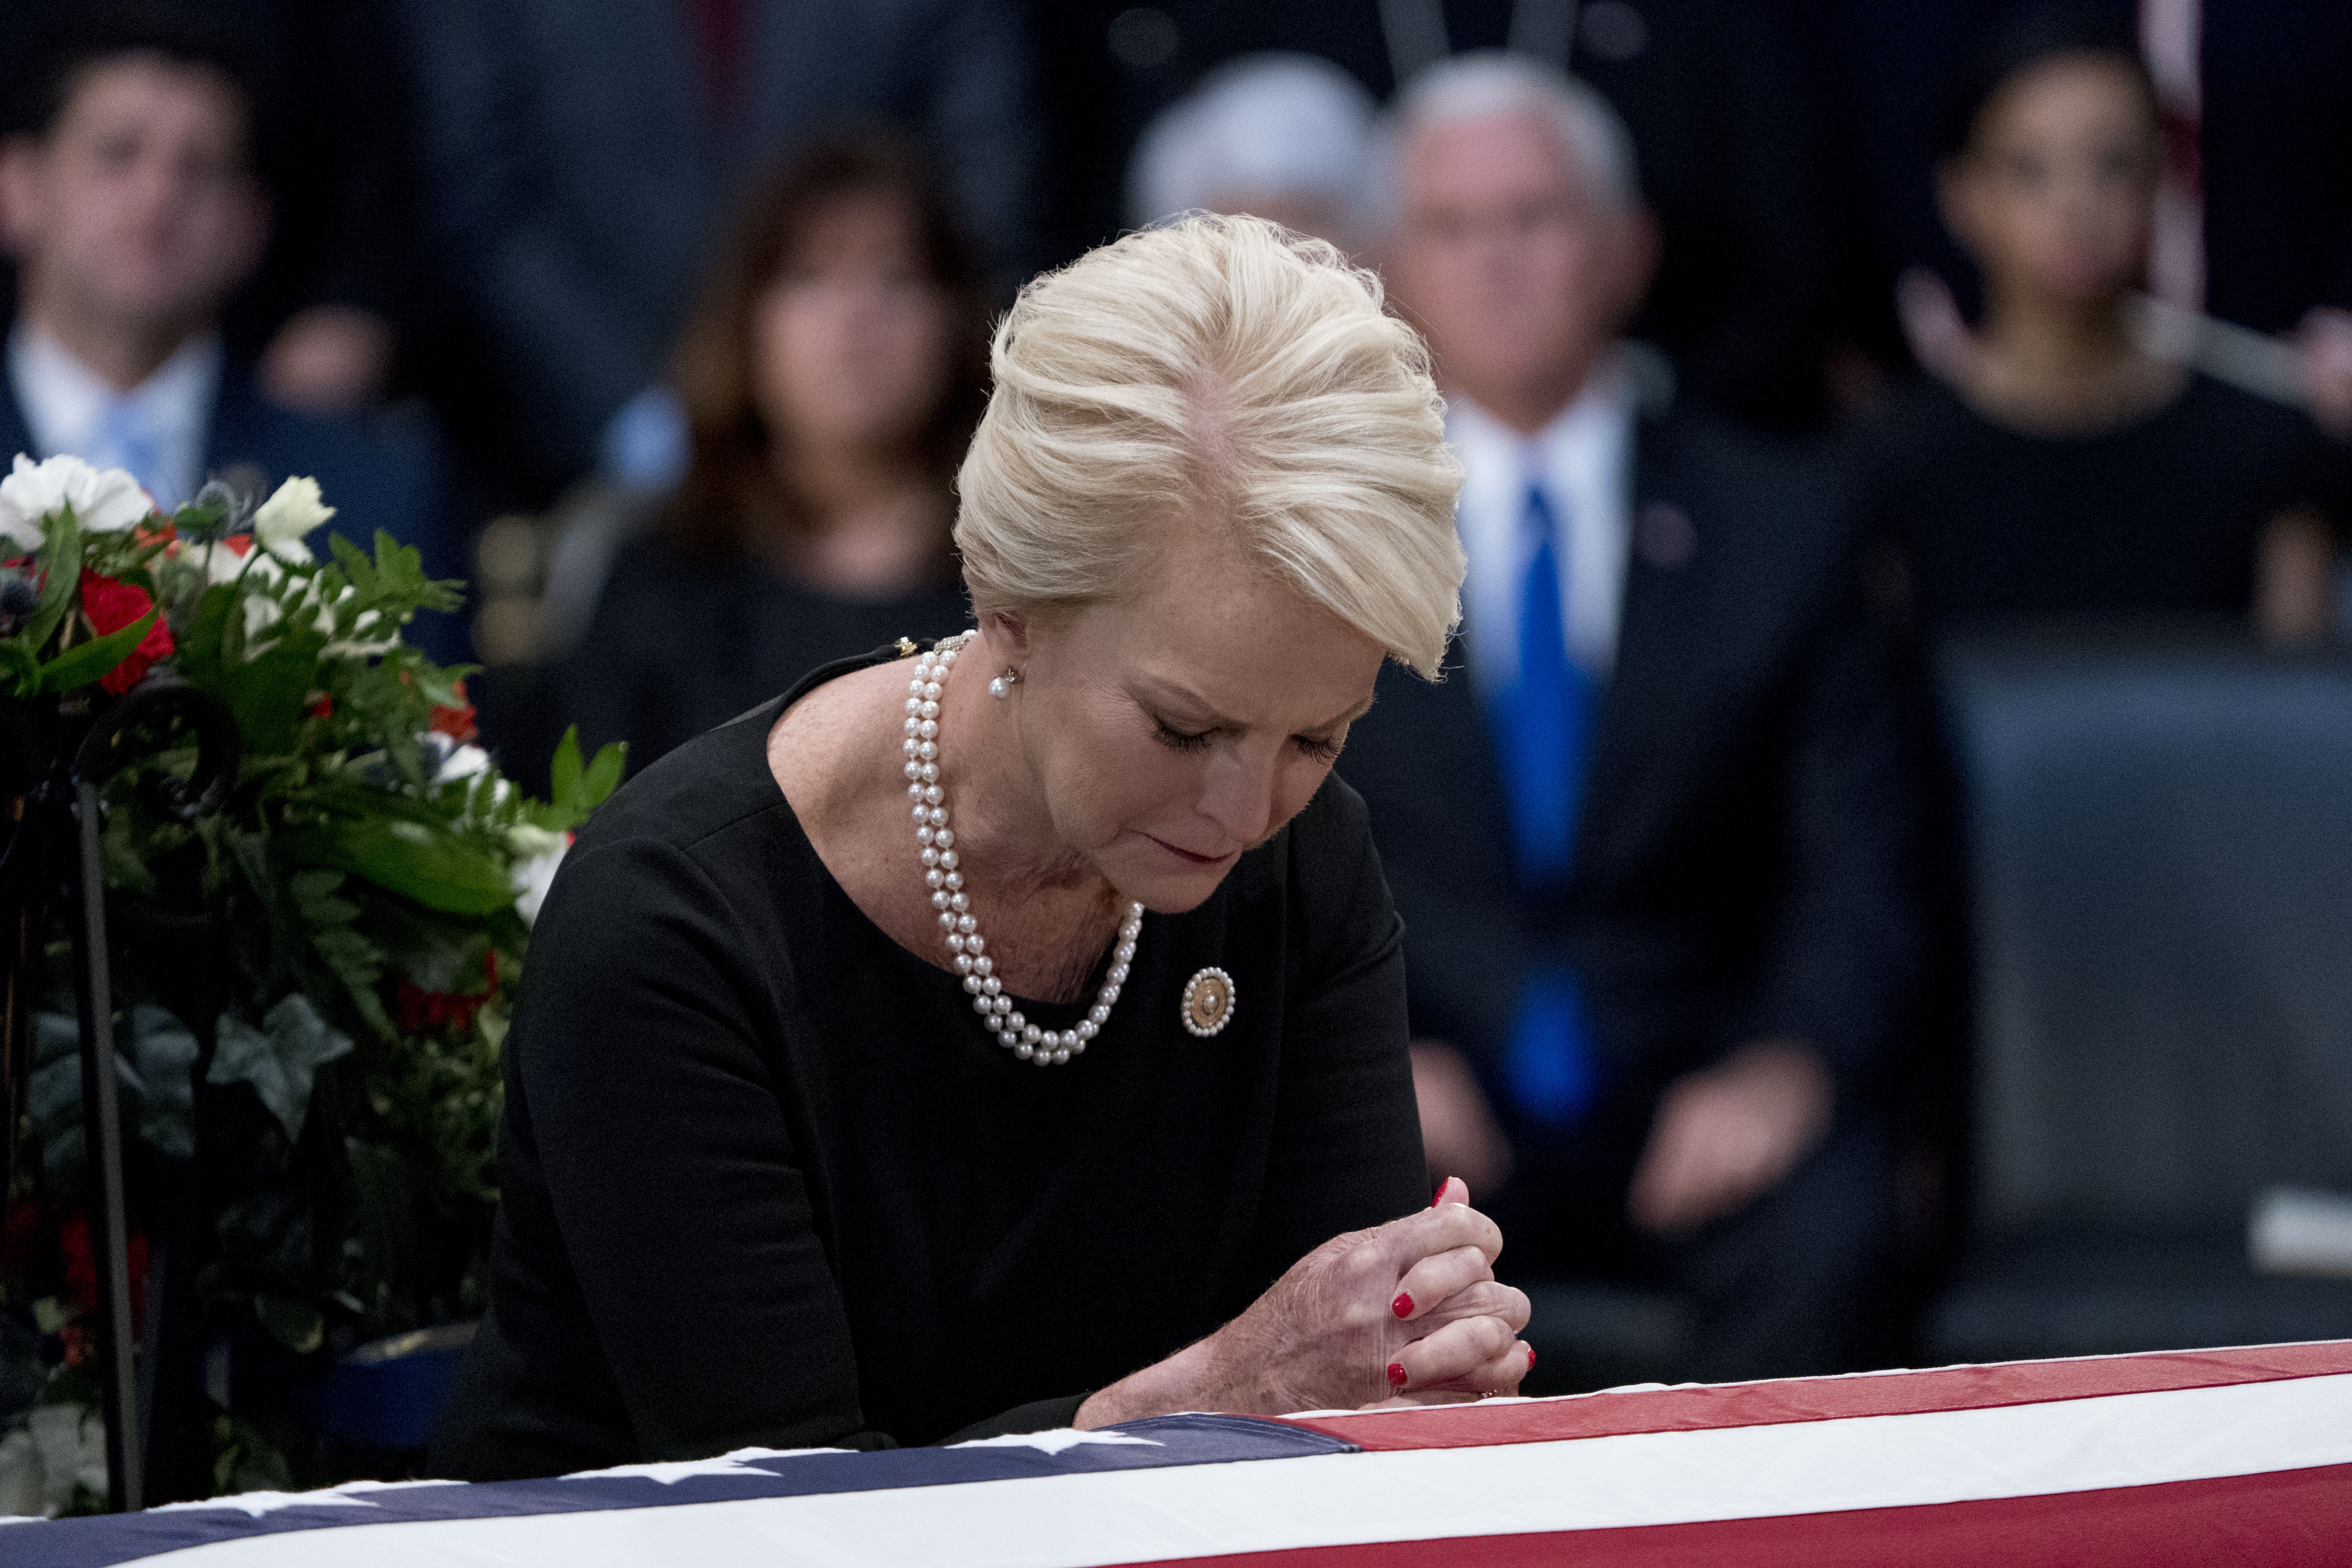 Cindy McCain leaning on John McCain's casket as he lies in state in the Rotunda of the U.S. Capitol, on August 31, 2018 in Washington, DC | Photo: Getty Images